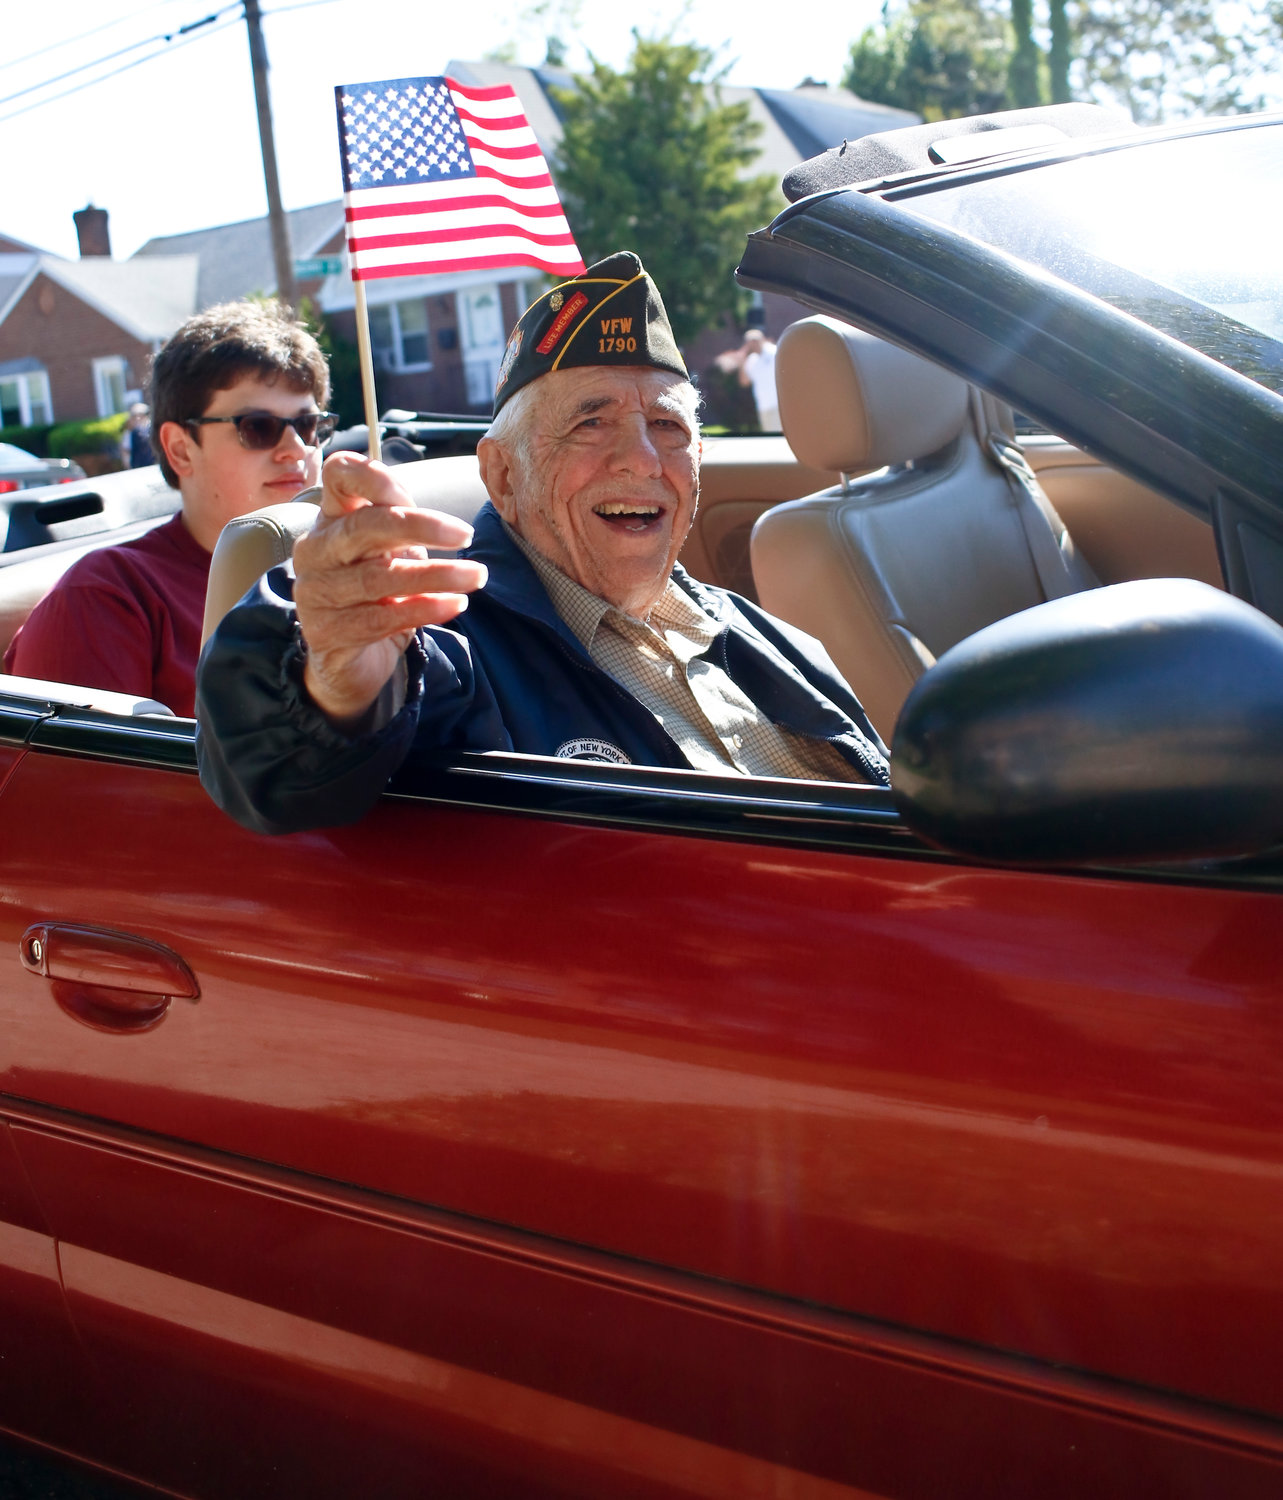 Louis Palermo at the 2019 Memorial Day parade. He was well known in the neighborhood and active in many local civic groups up until the weeks before his death.